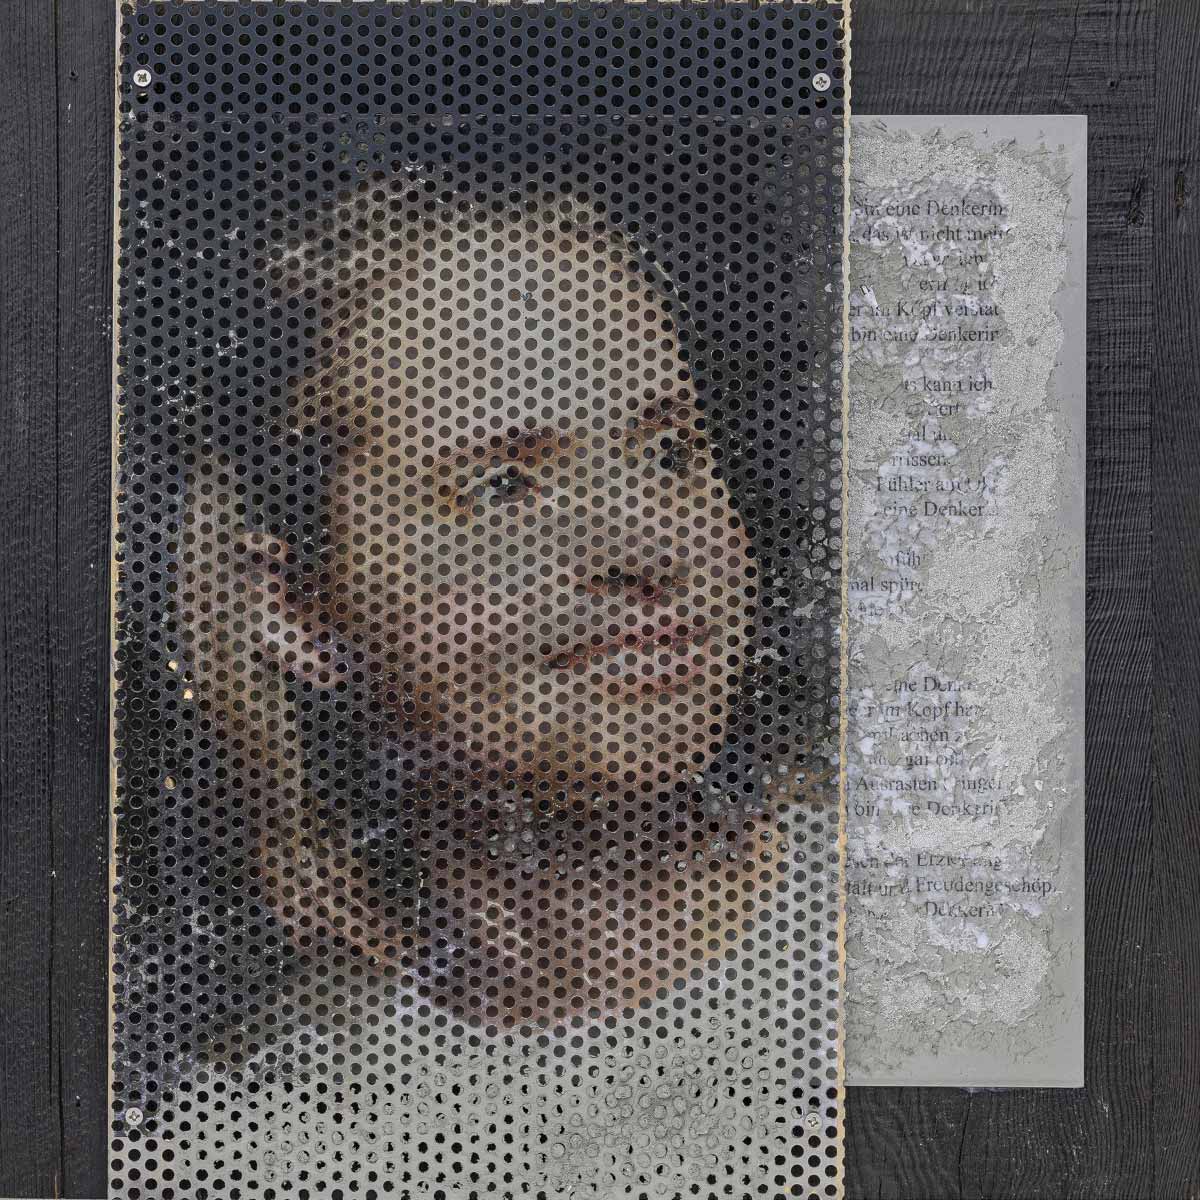 Metal Portrait The autistic Photo on stainless steel and aluminum mixed media Ingrid Heiss